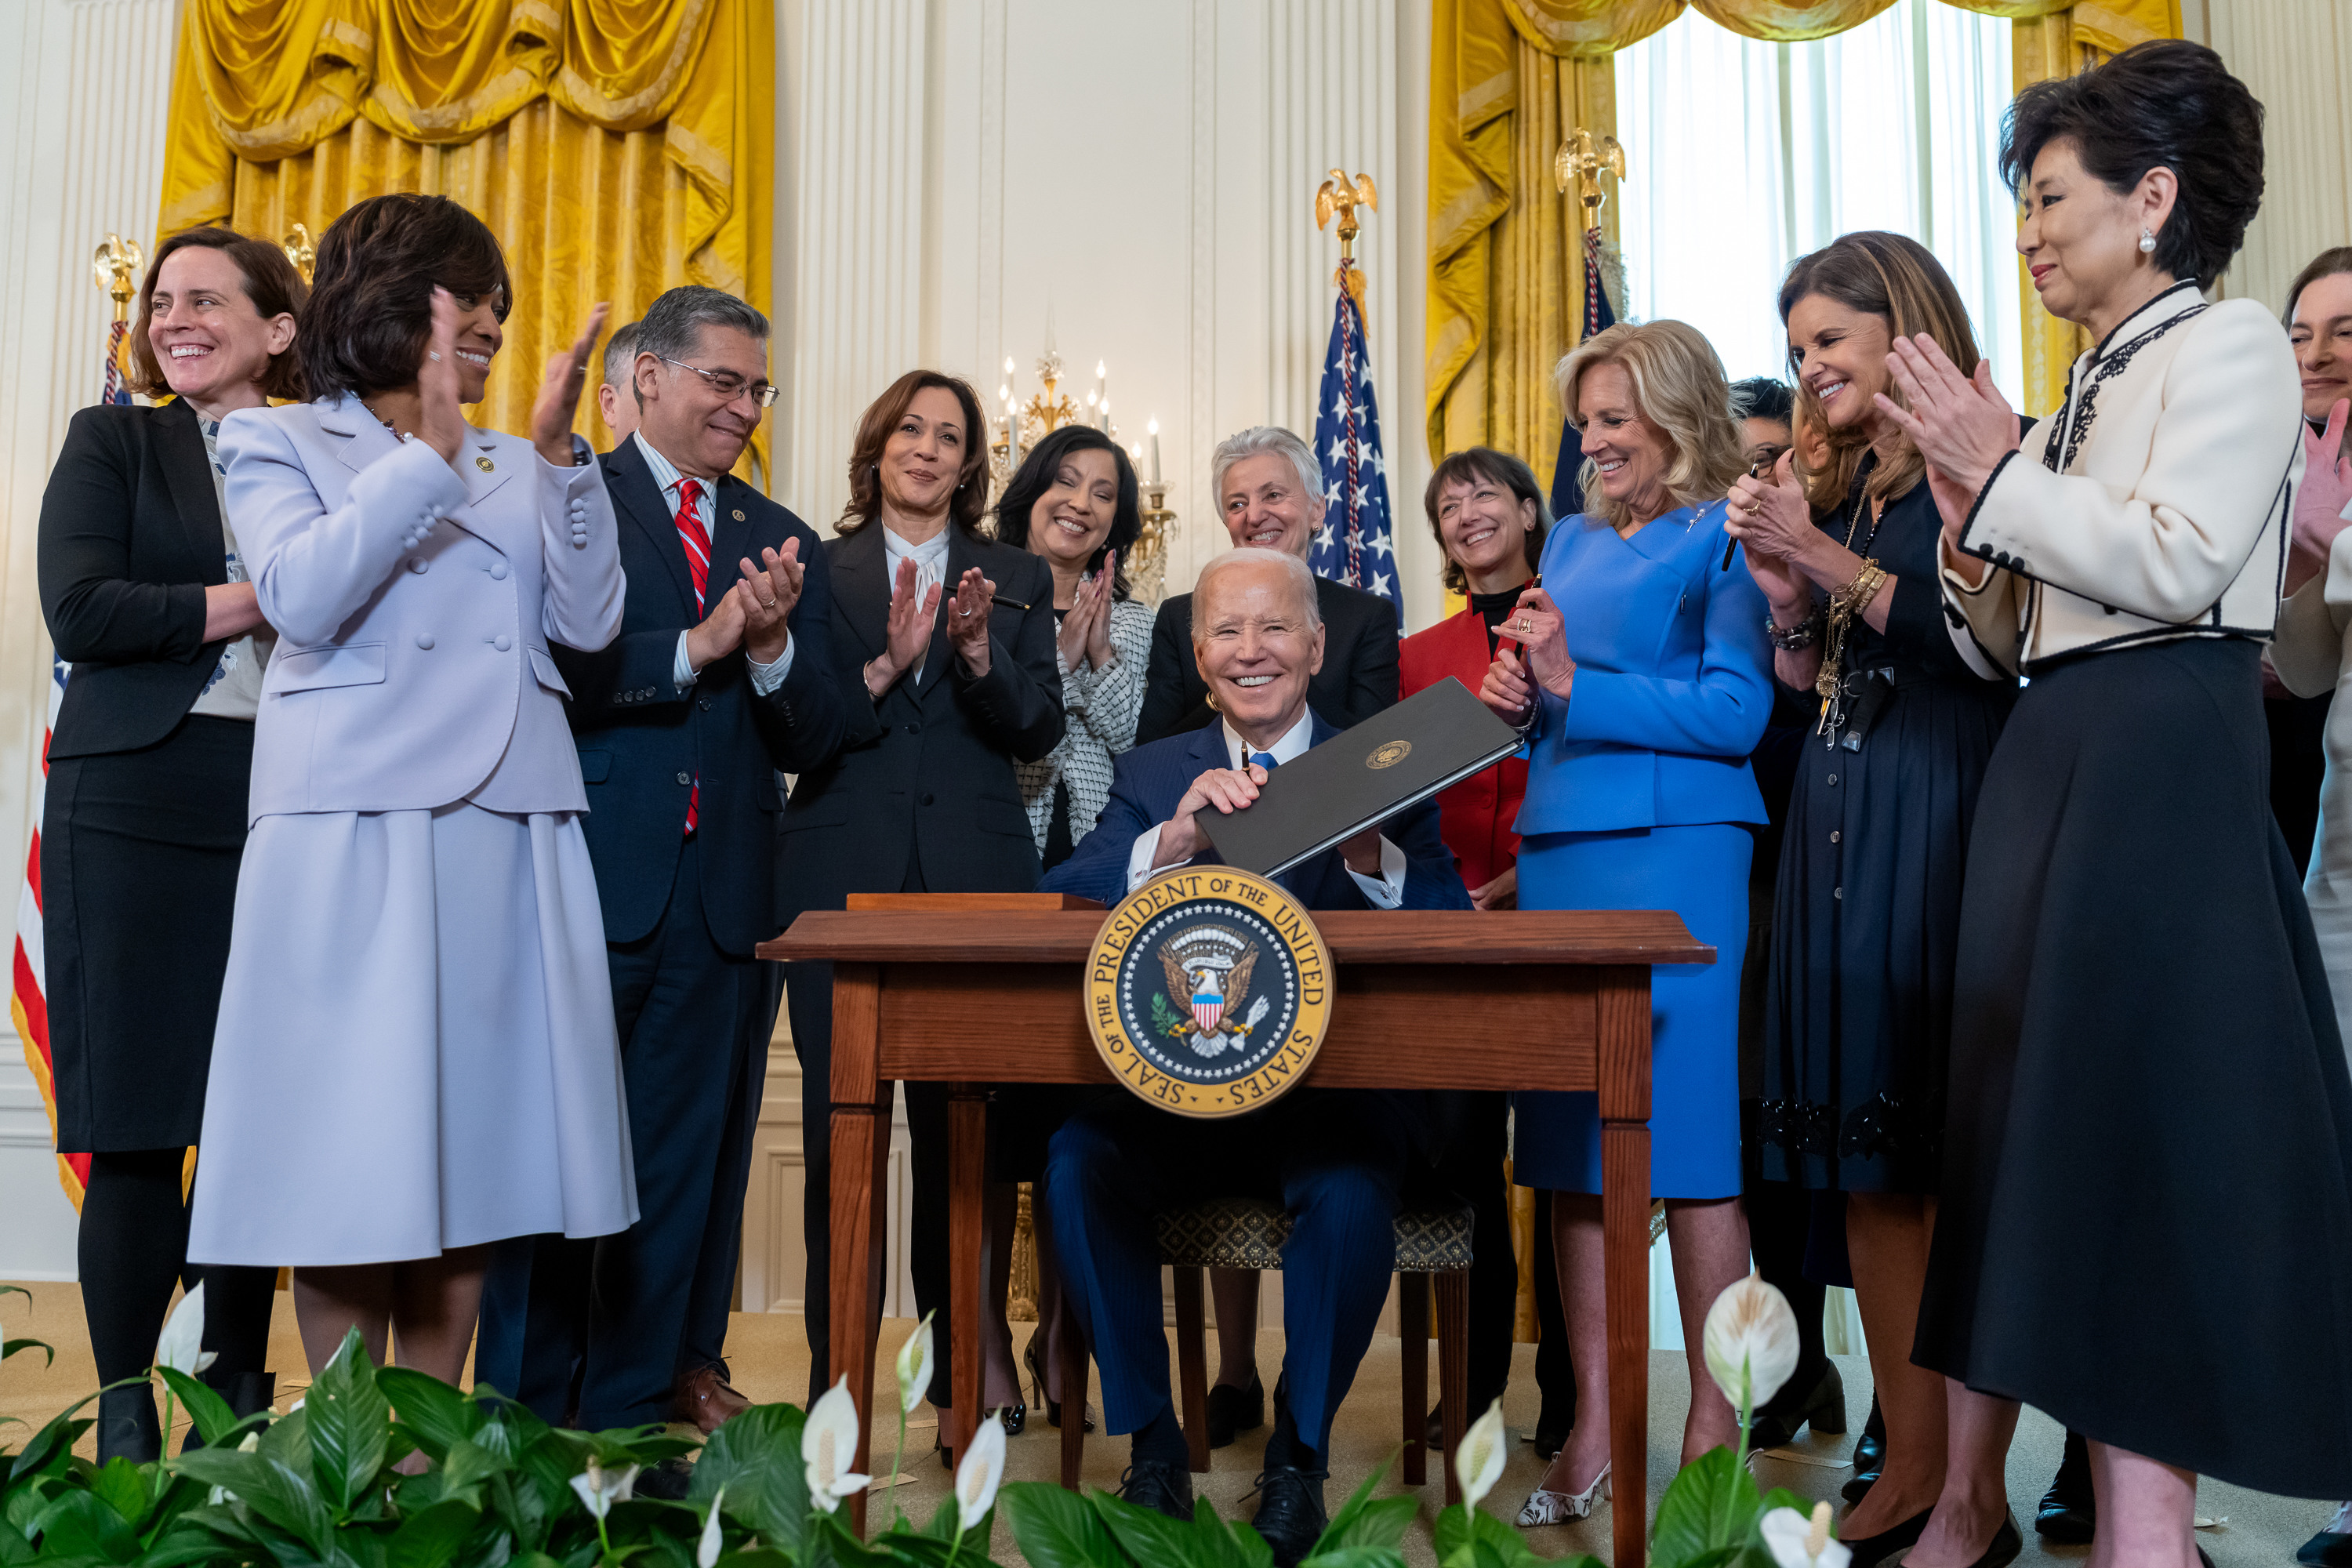 Photo of President Biden signing executive order surrounded by women in leadership clapping